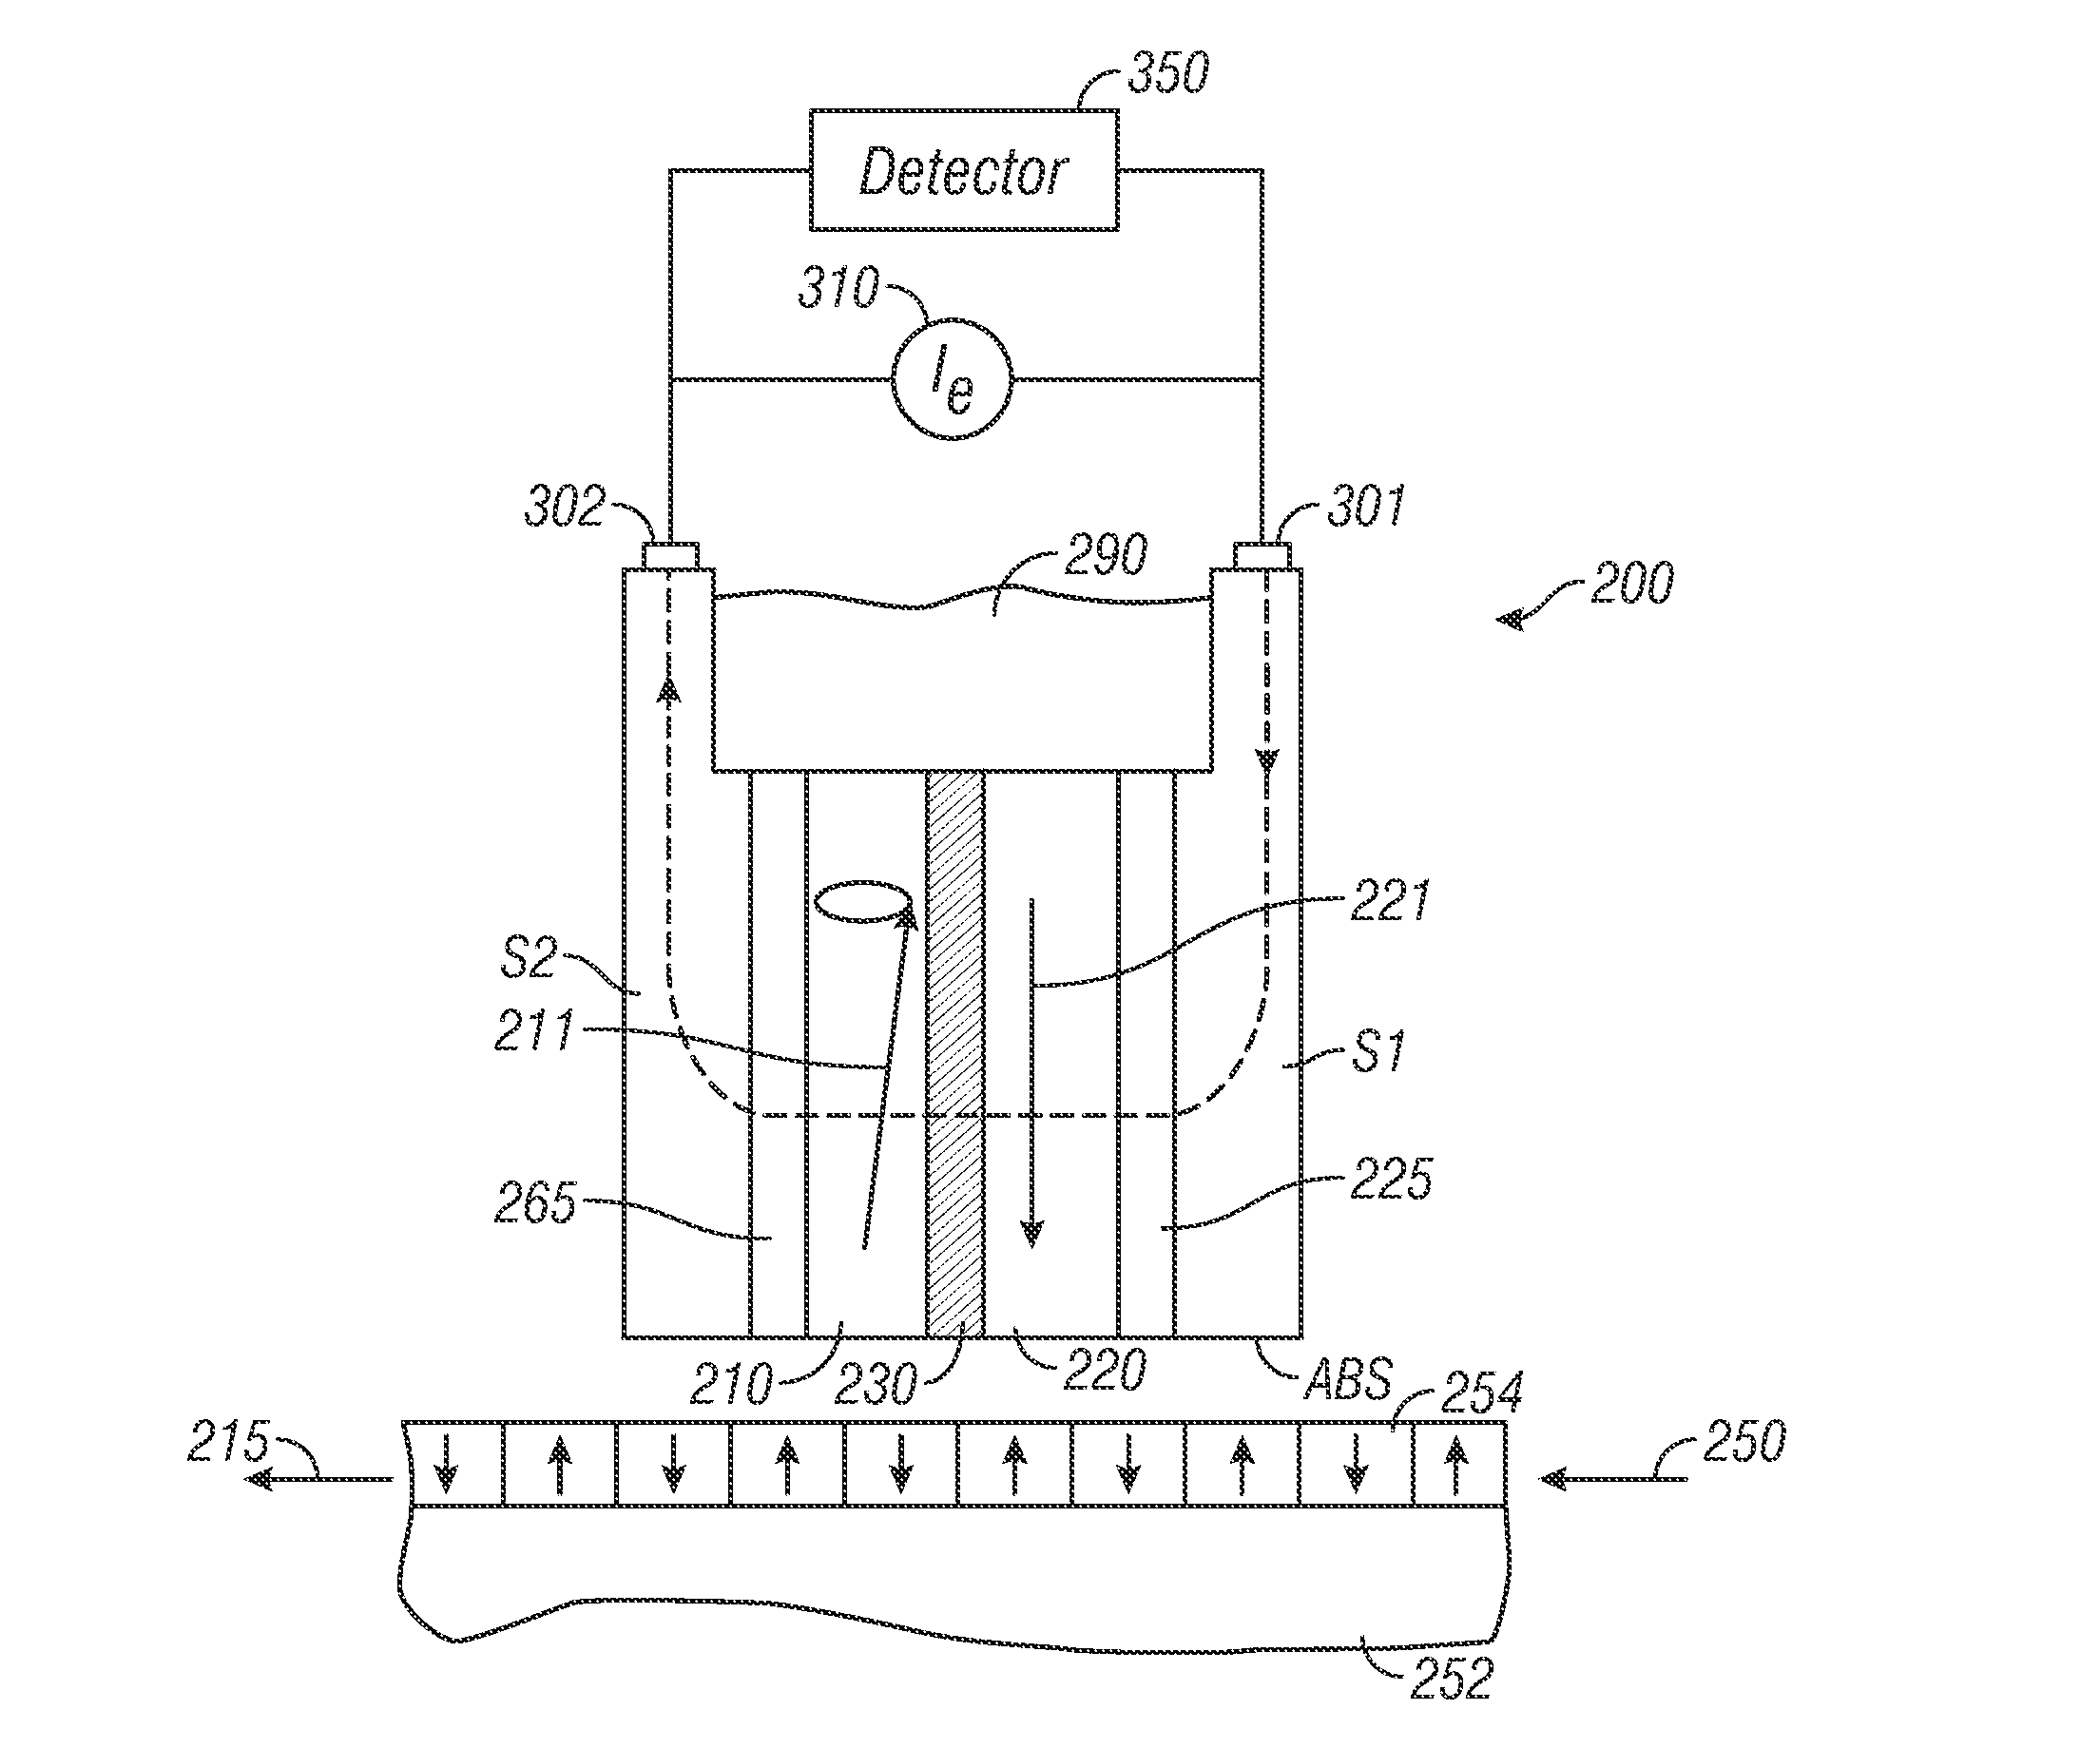 Spin-torque oscillator (STO) with magnetically damped free layer